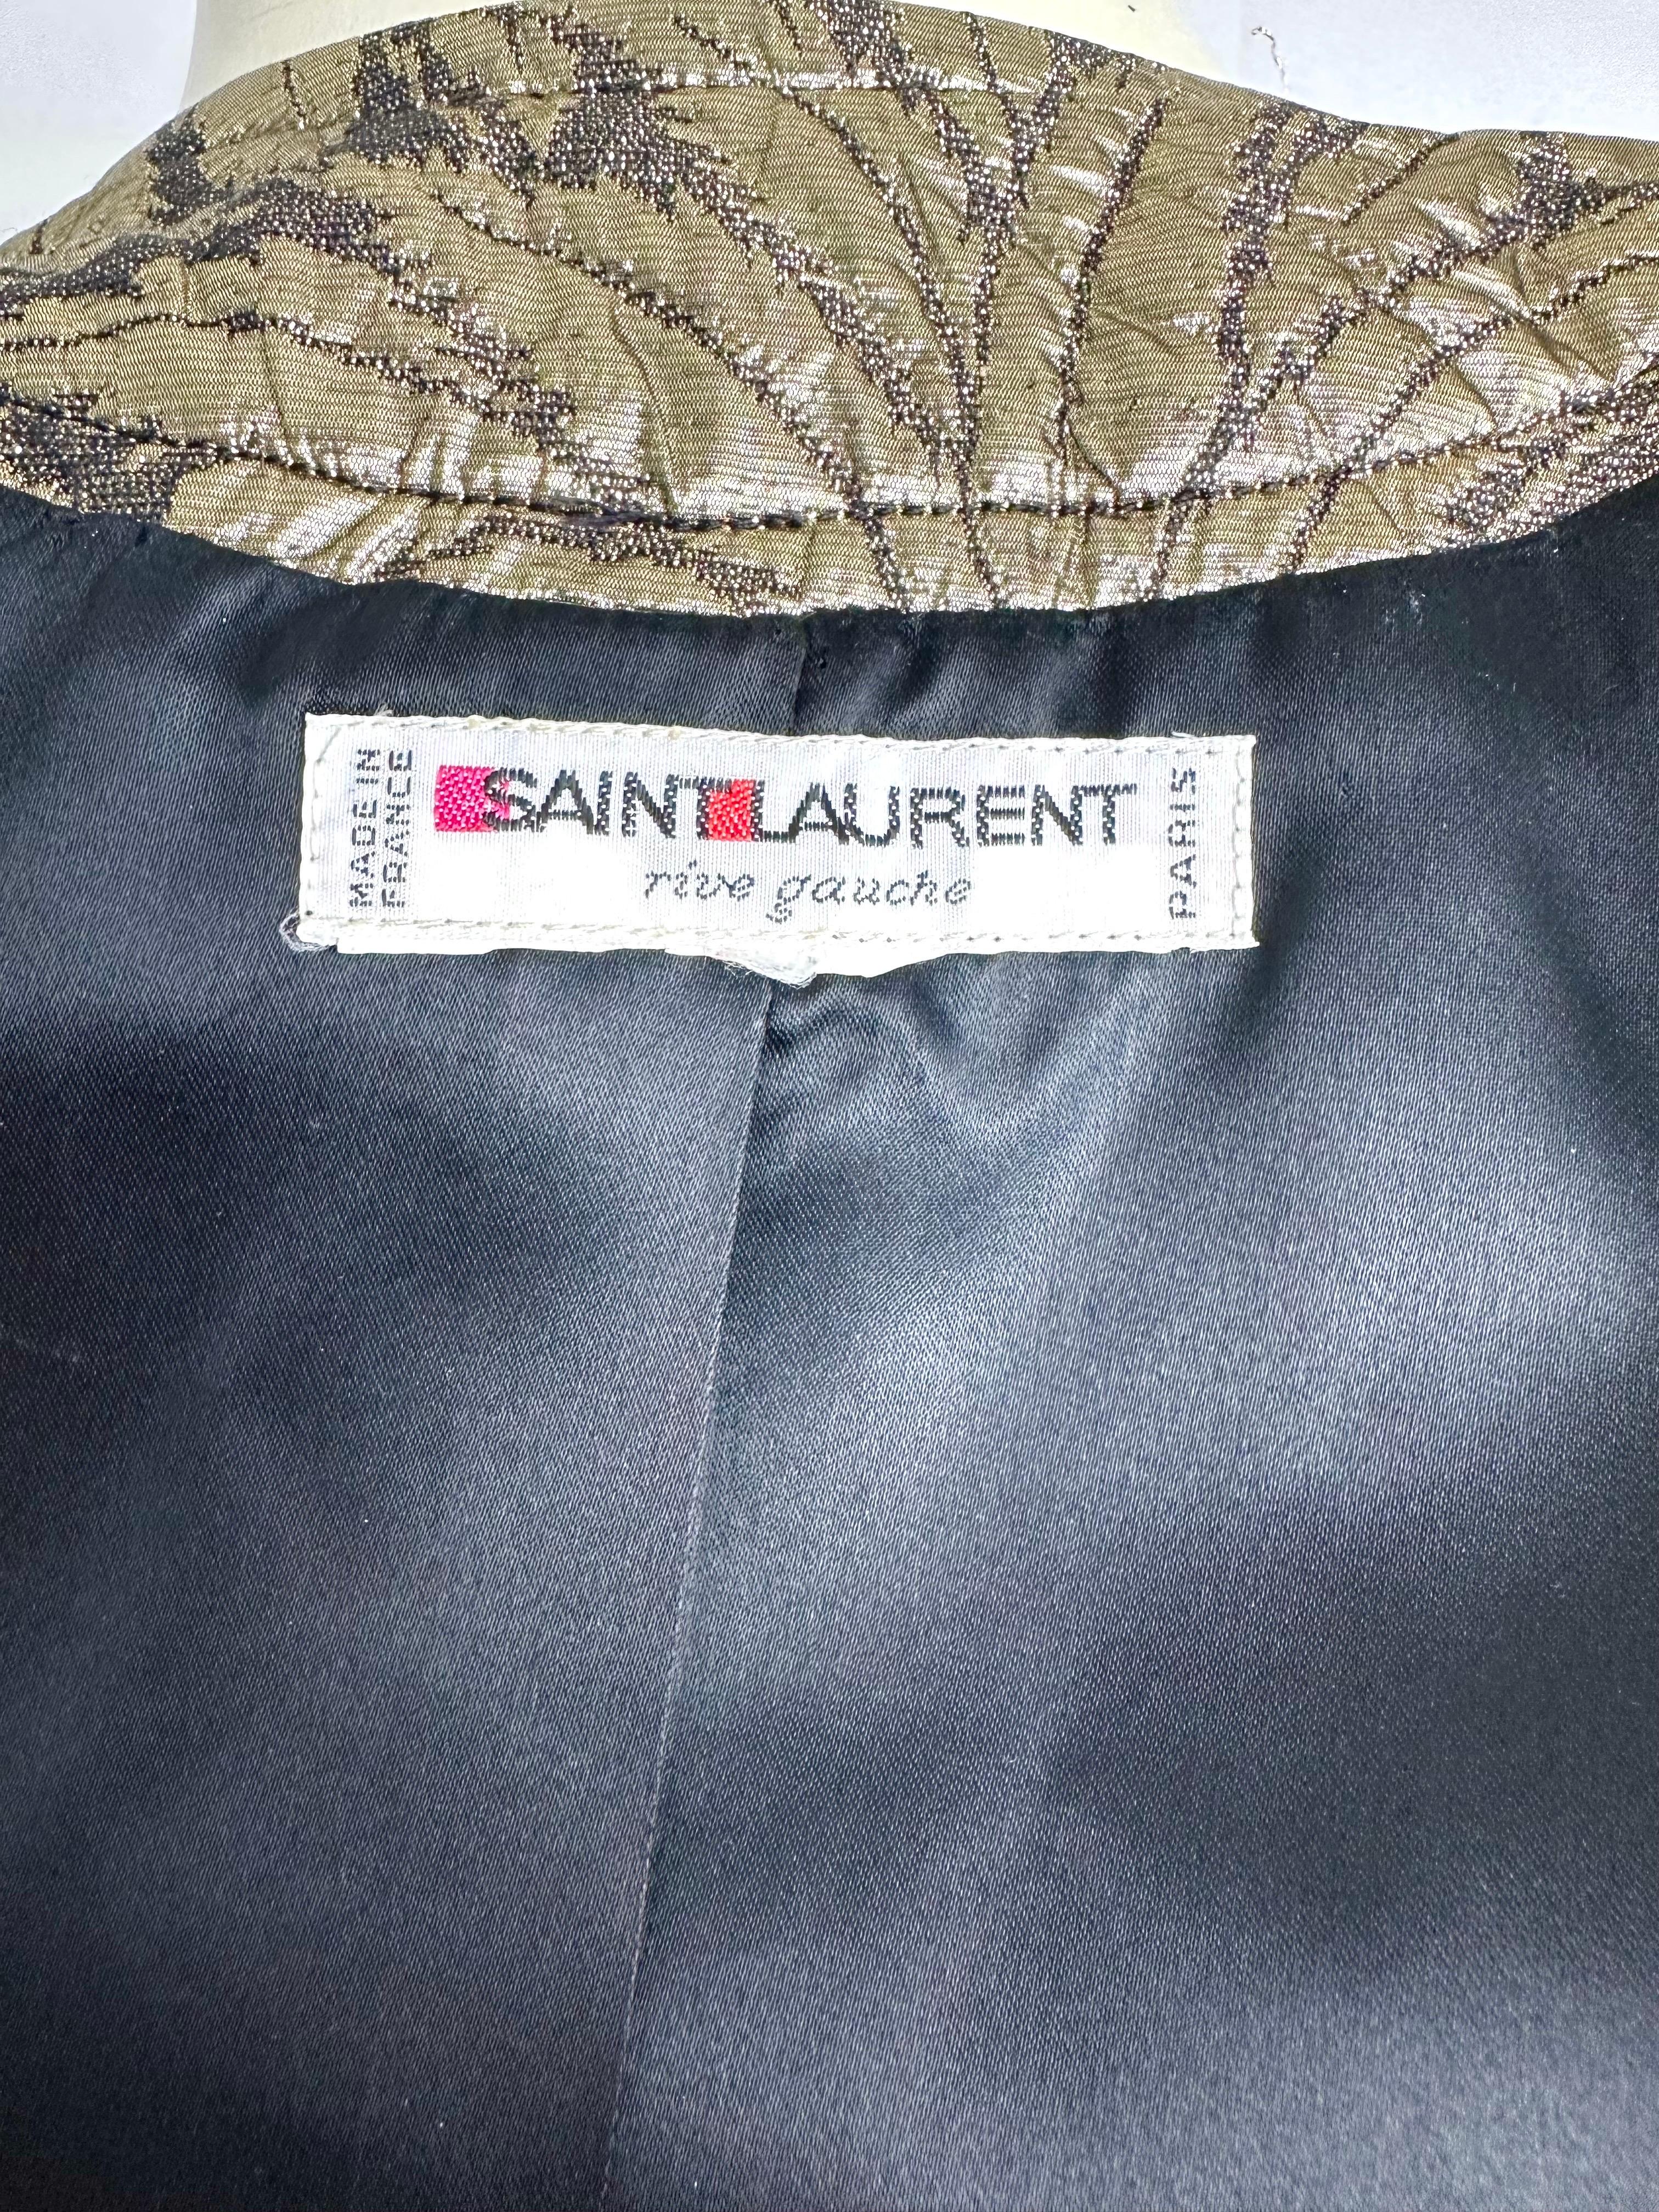 YSL Yves saint Laurent gold brocade skirt suit F/W 86 For Sale 11